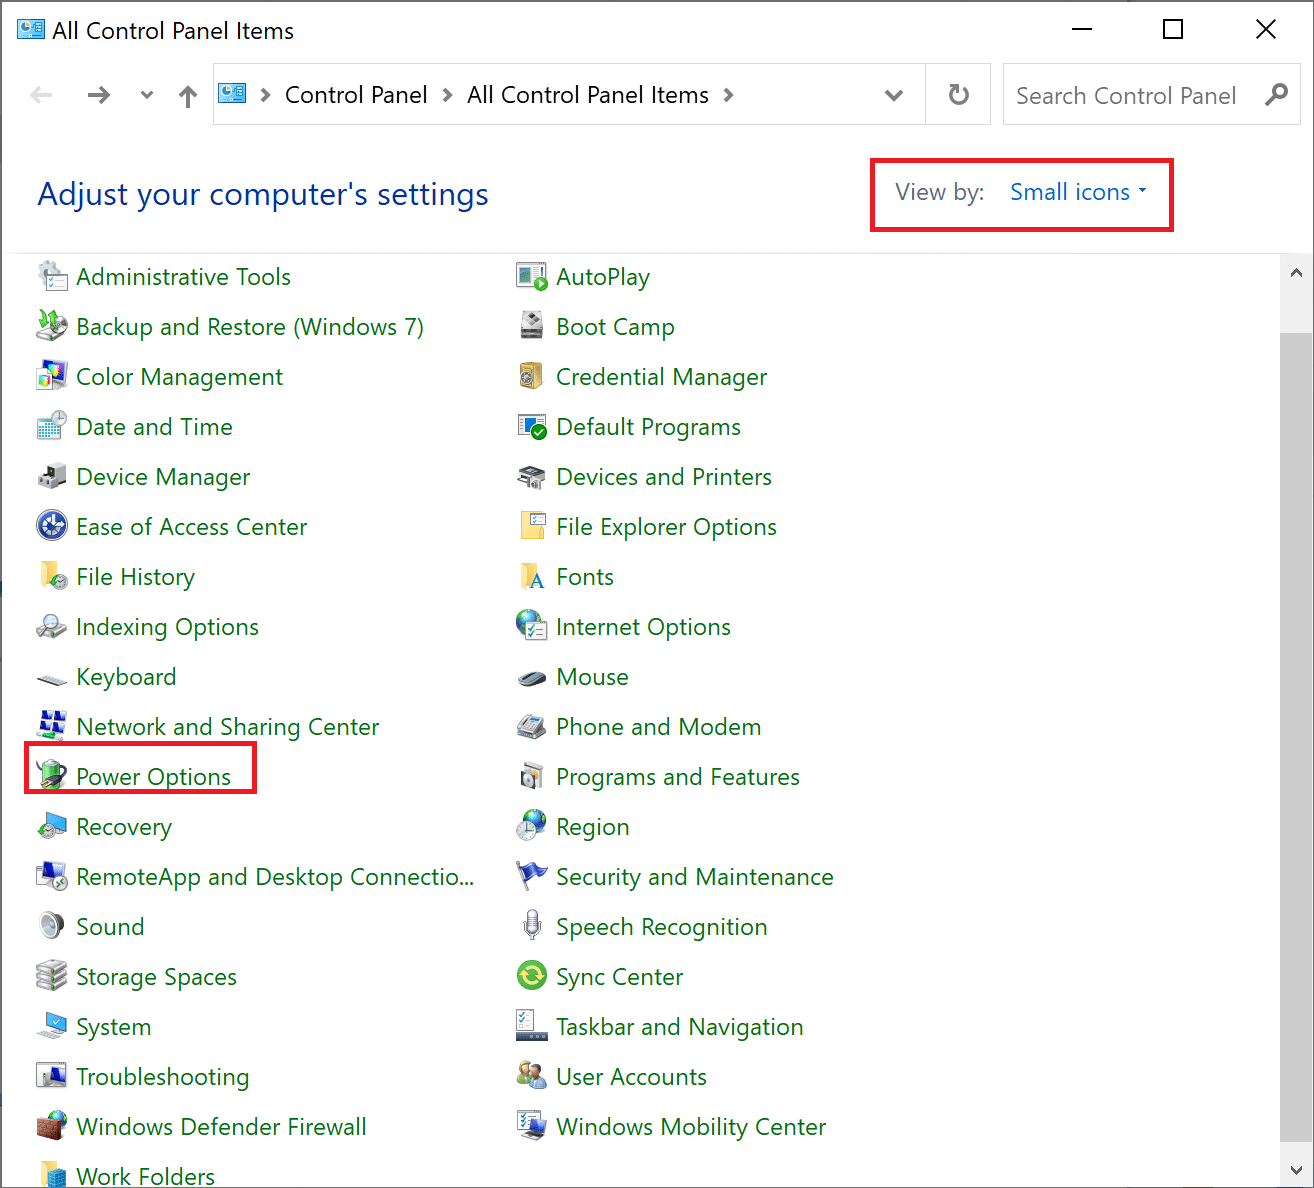 Click on View by and select Small icons. Then go to Power Options | how to reduce CPU usage Windows 10 